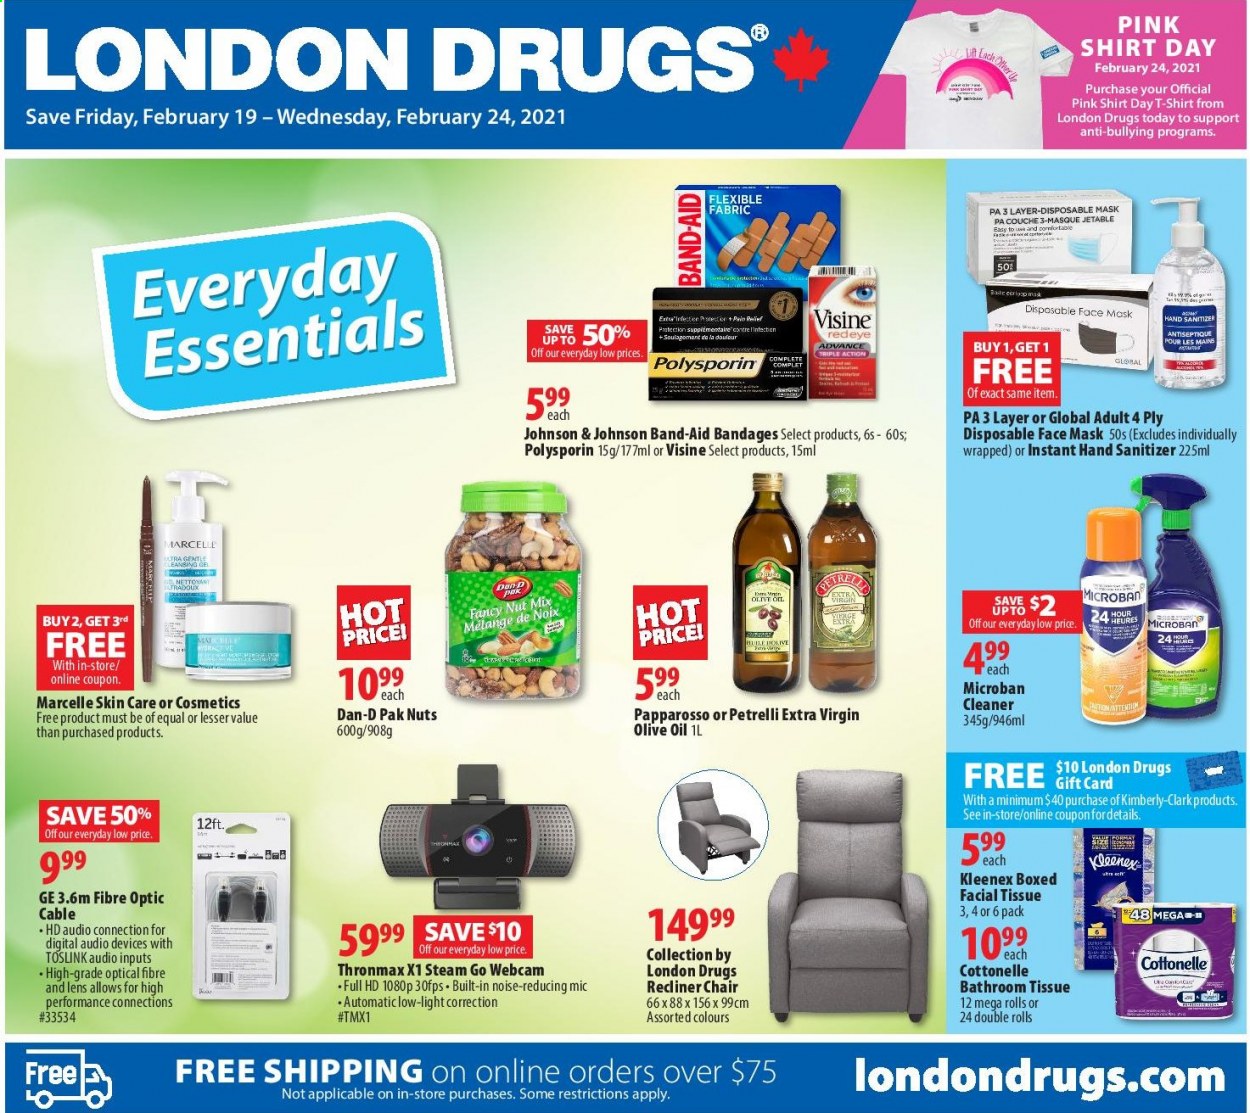 thumbnail - London Drugs Flyer - February 19, 2021 - February 24, 2021 - Sales products - Dan-D Pak, extra virgin olive oil, olive oil, oil, Johnson's, bath tissue, Cottonelle, Kleenex, cleaner, hand sanitizer, webcam, lens, chair, pain relief, disposable mask. Page 1.